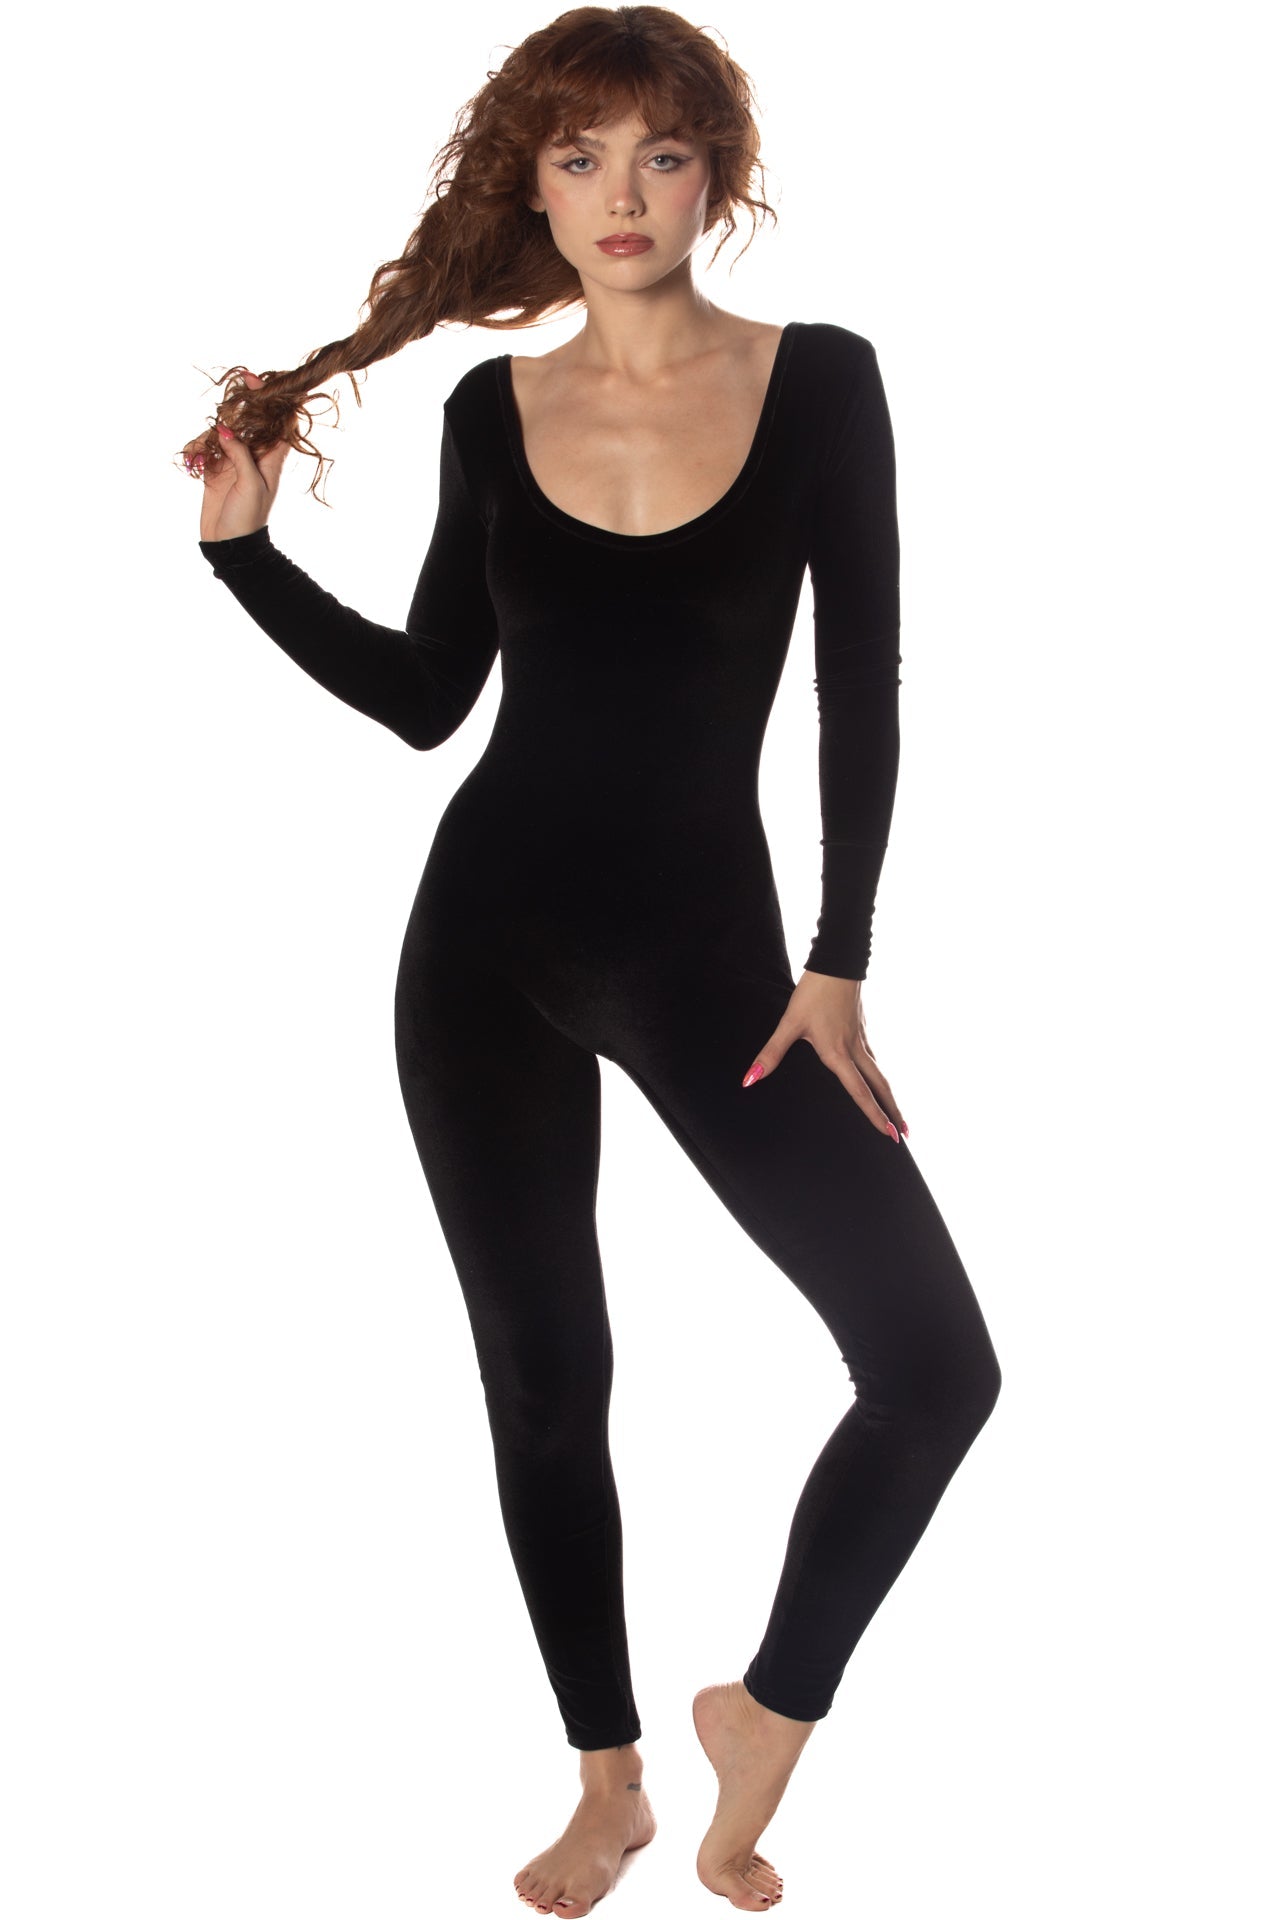 Outerwear Catsuits